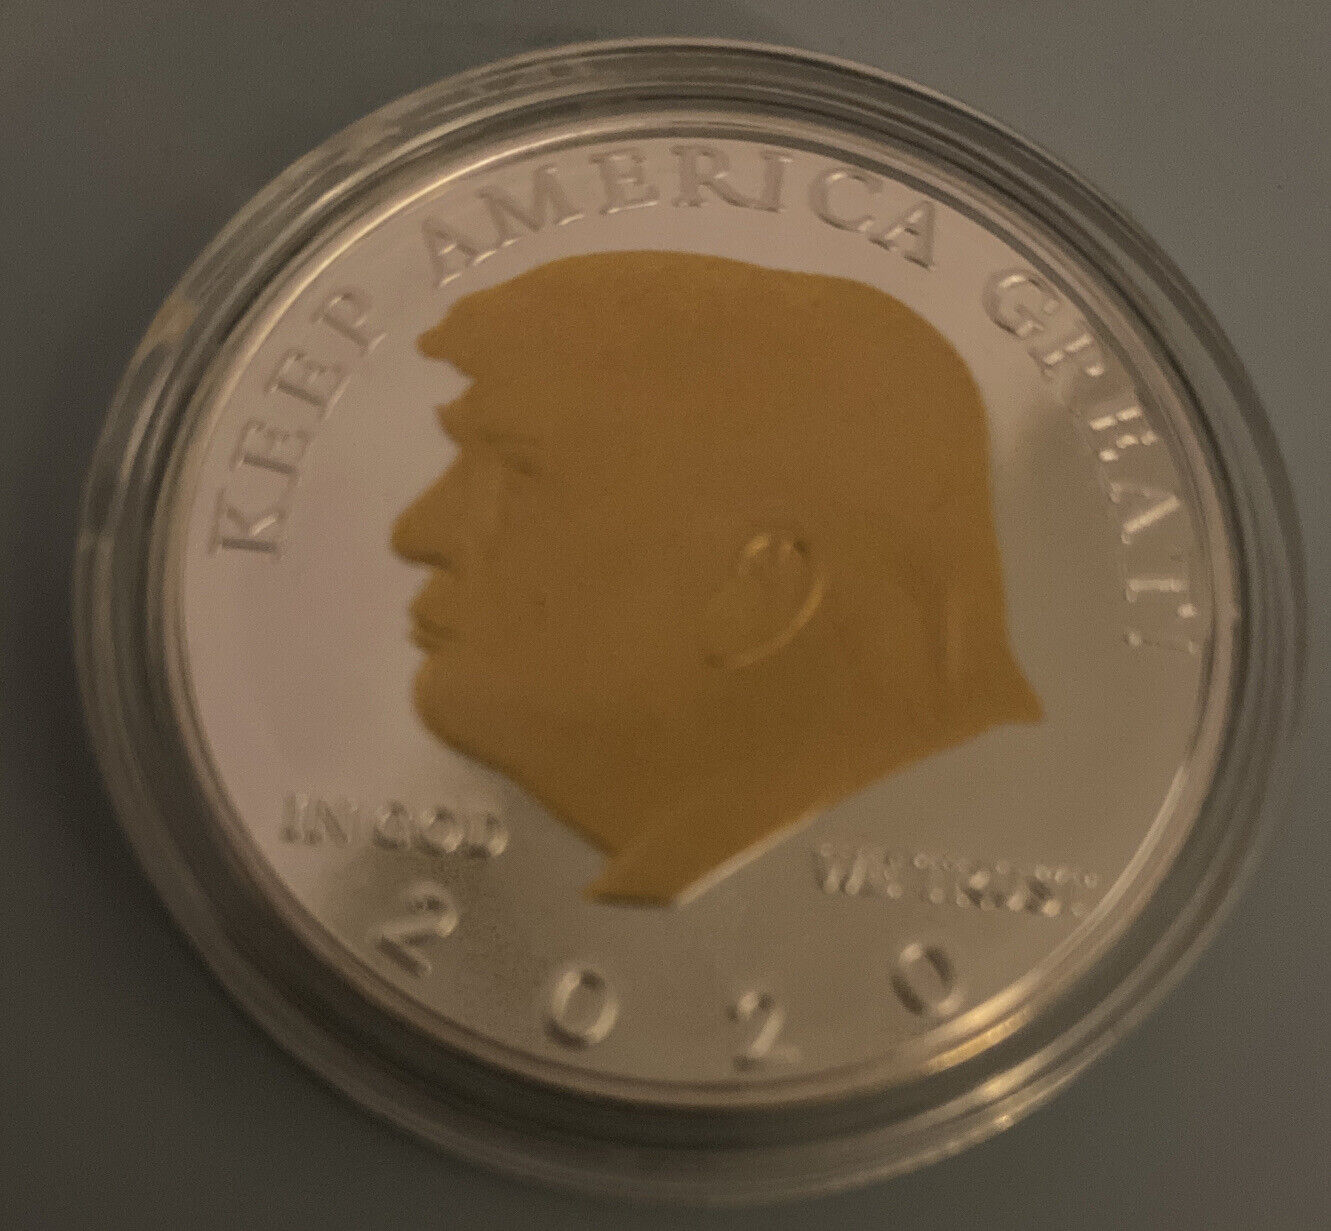 2020 Coin Donald Trump US  Challenge Presidental Seal Keep America Great EAGLE